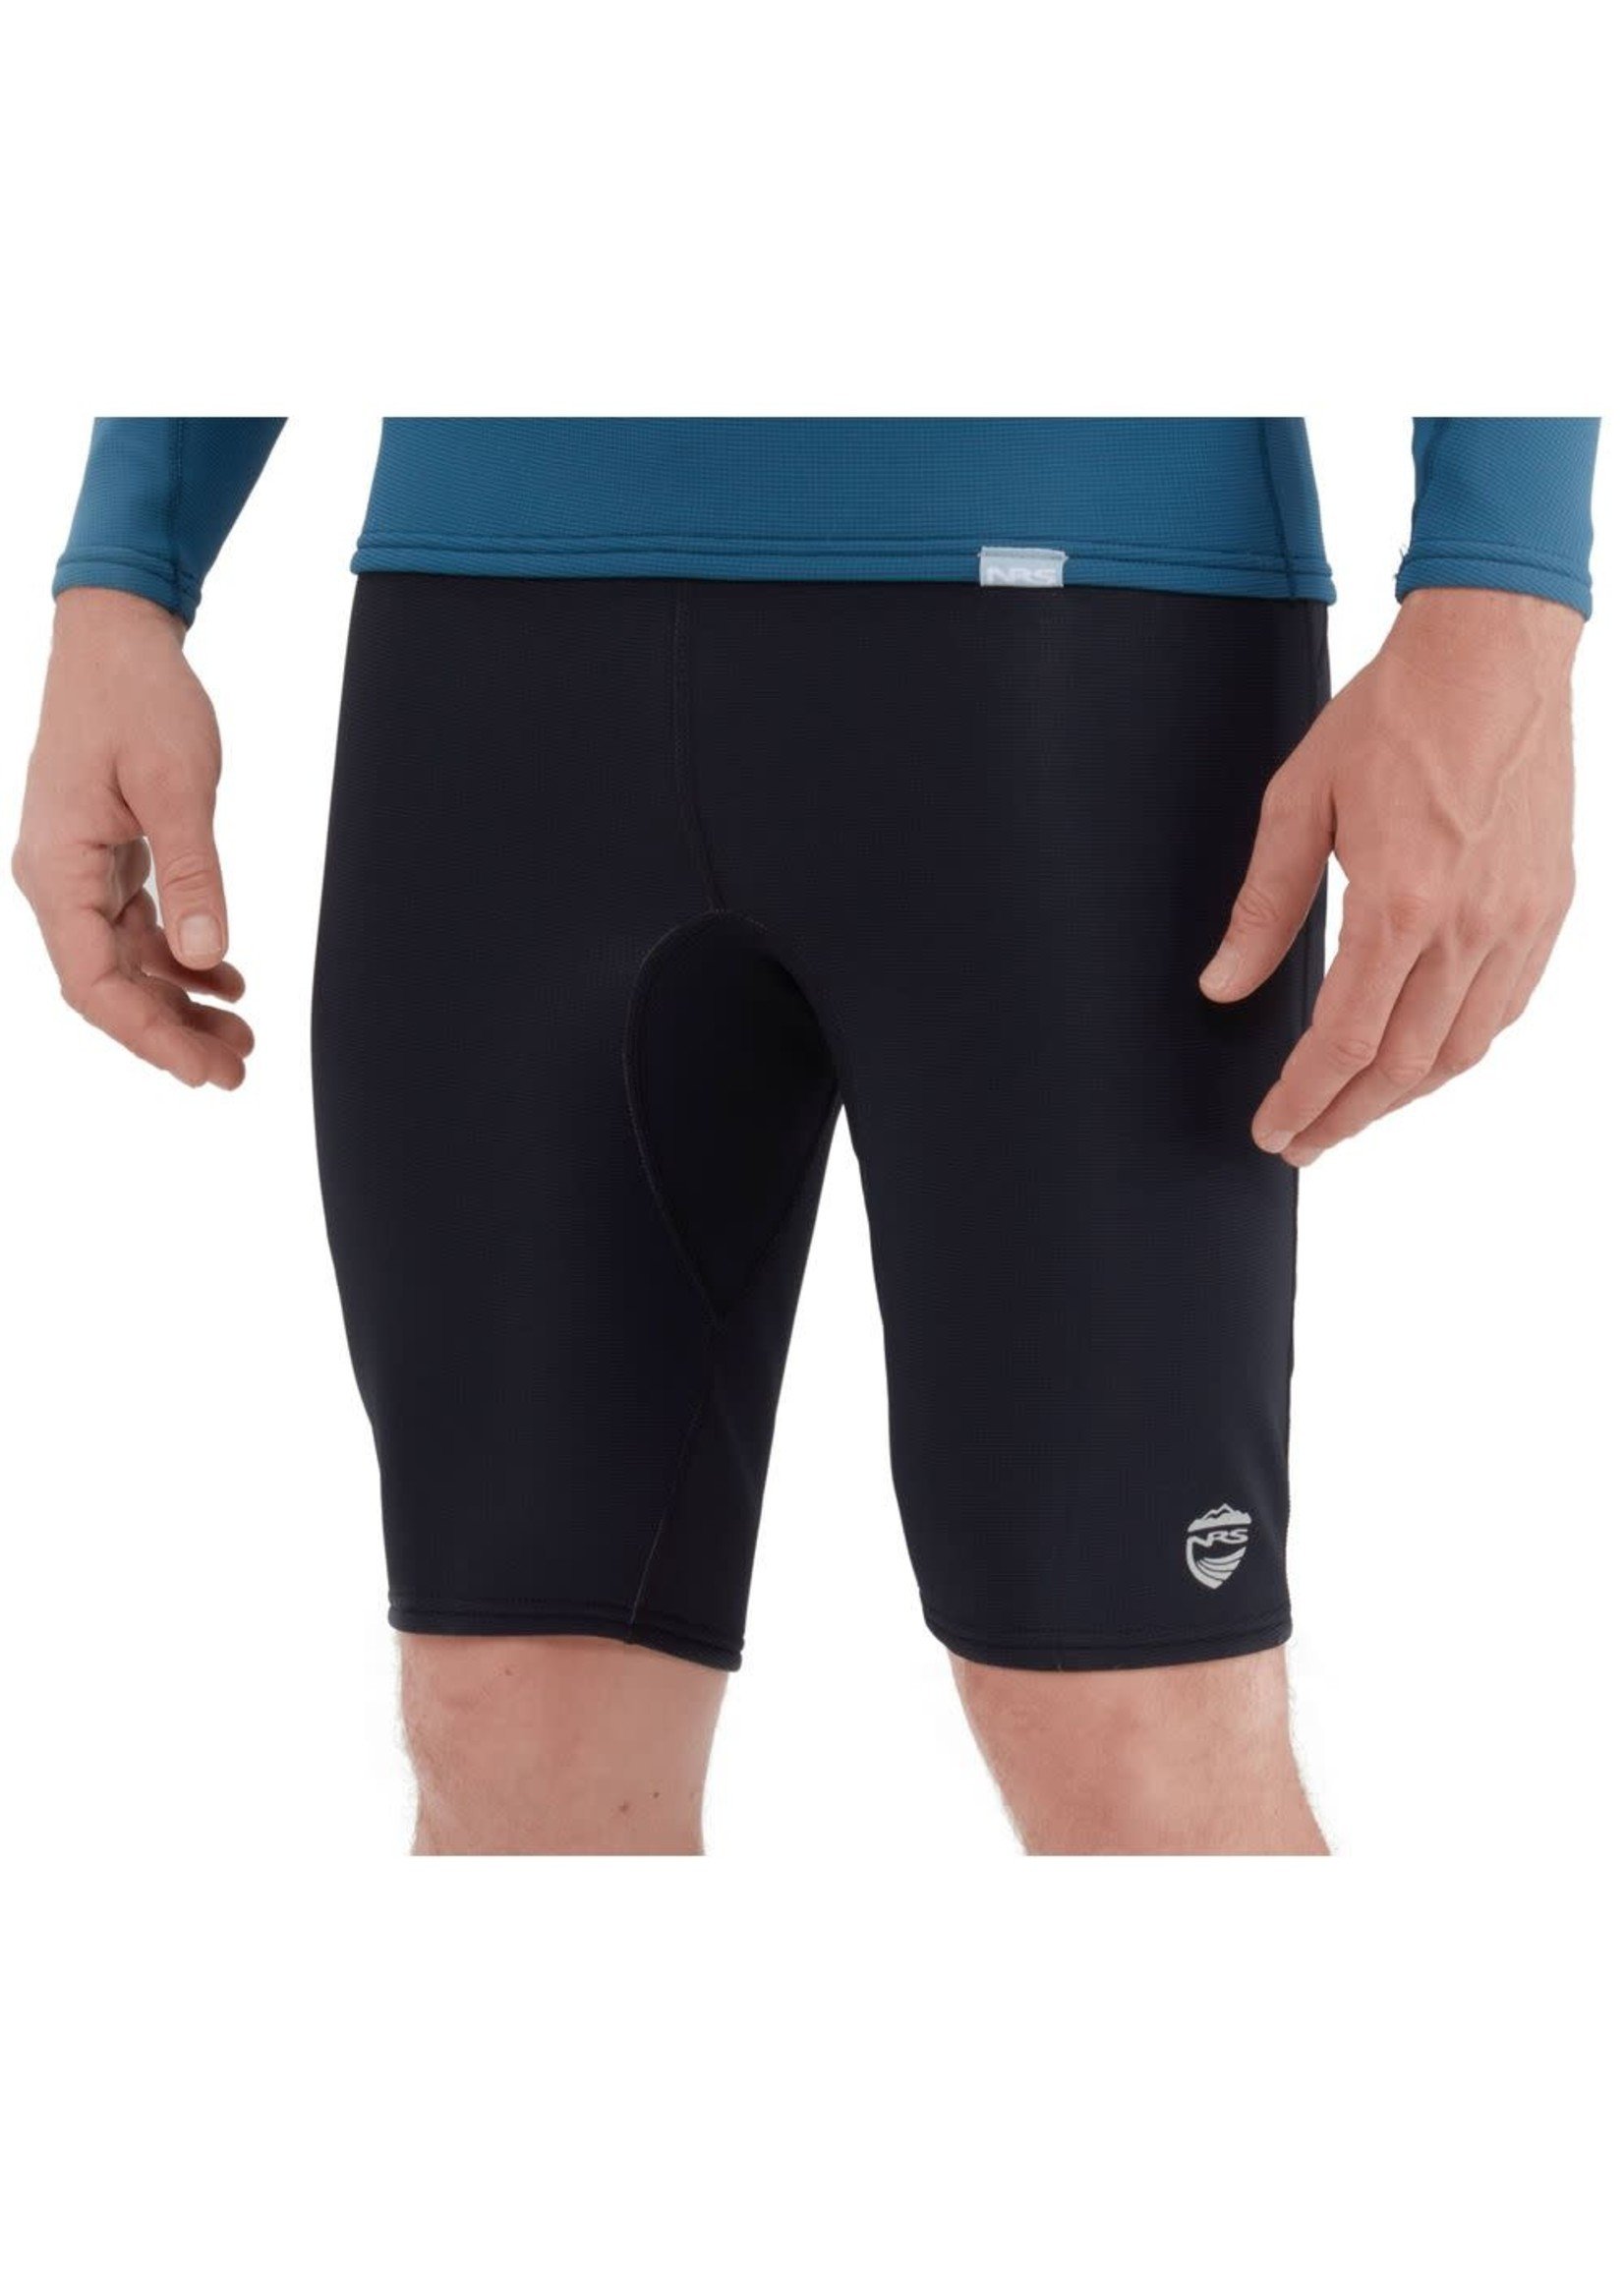 NRS Shorts Hydroskin 0.5 pour hommes